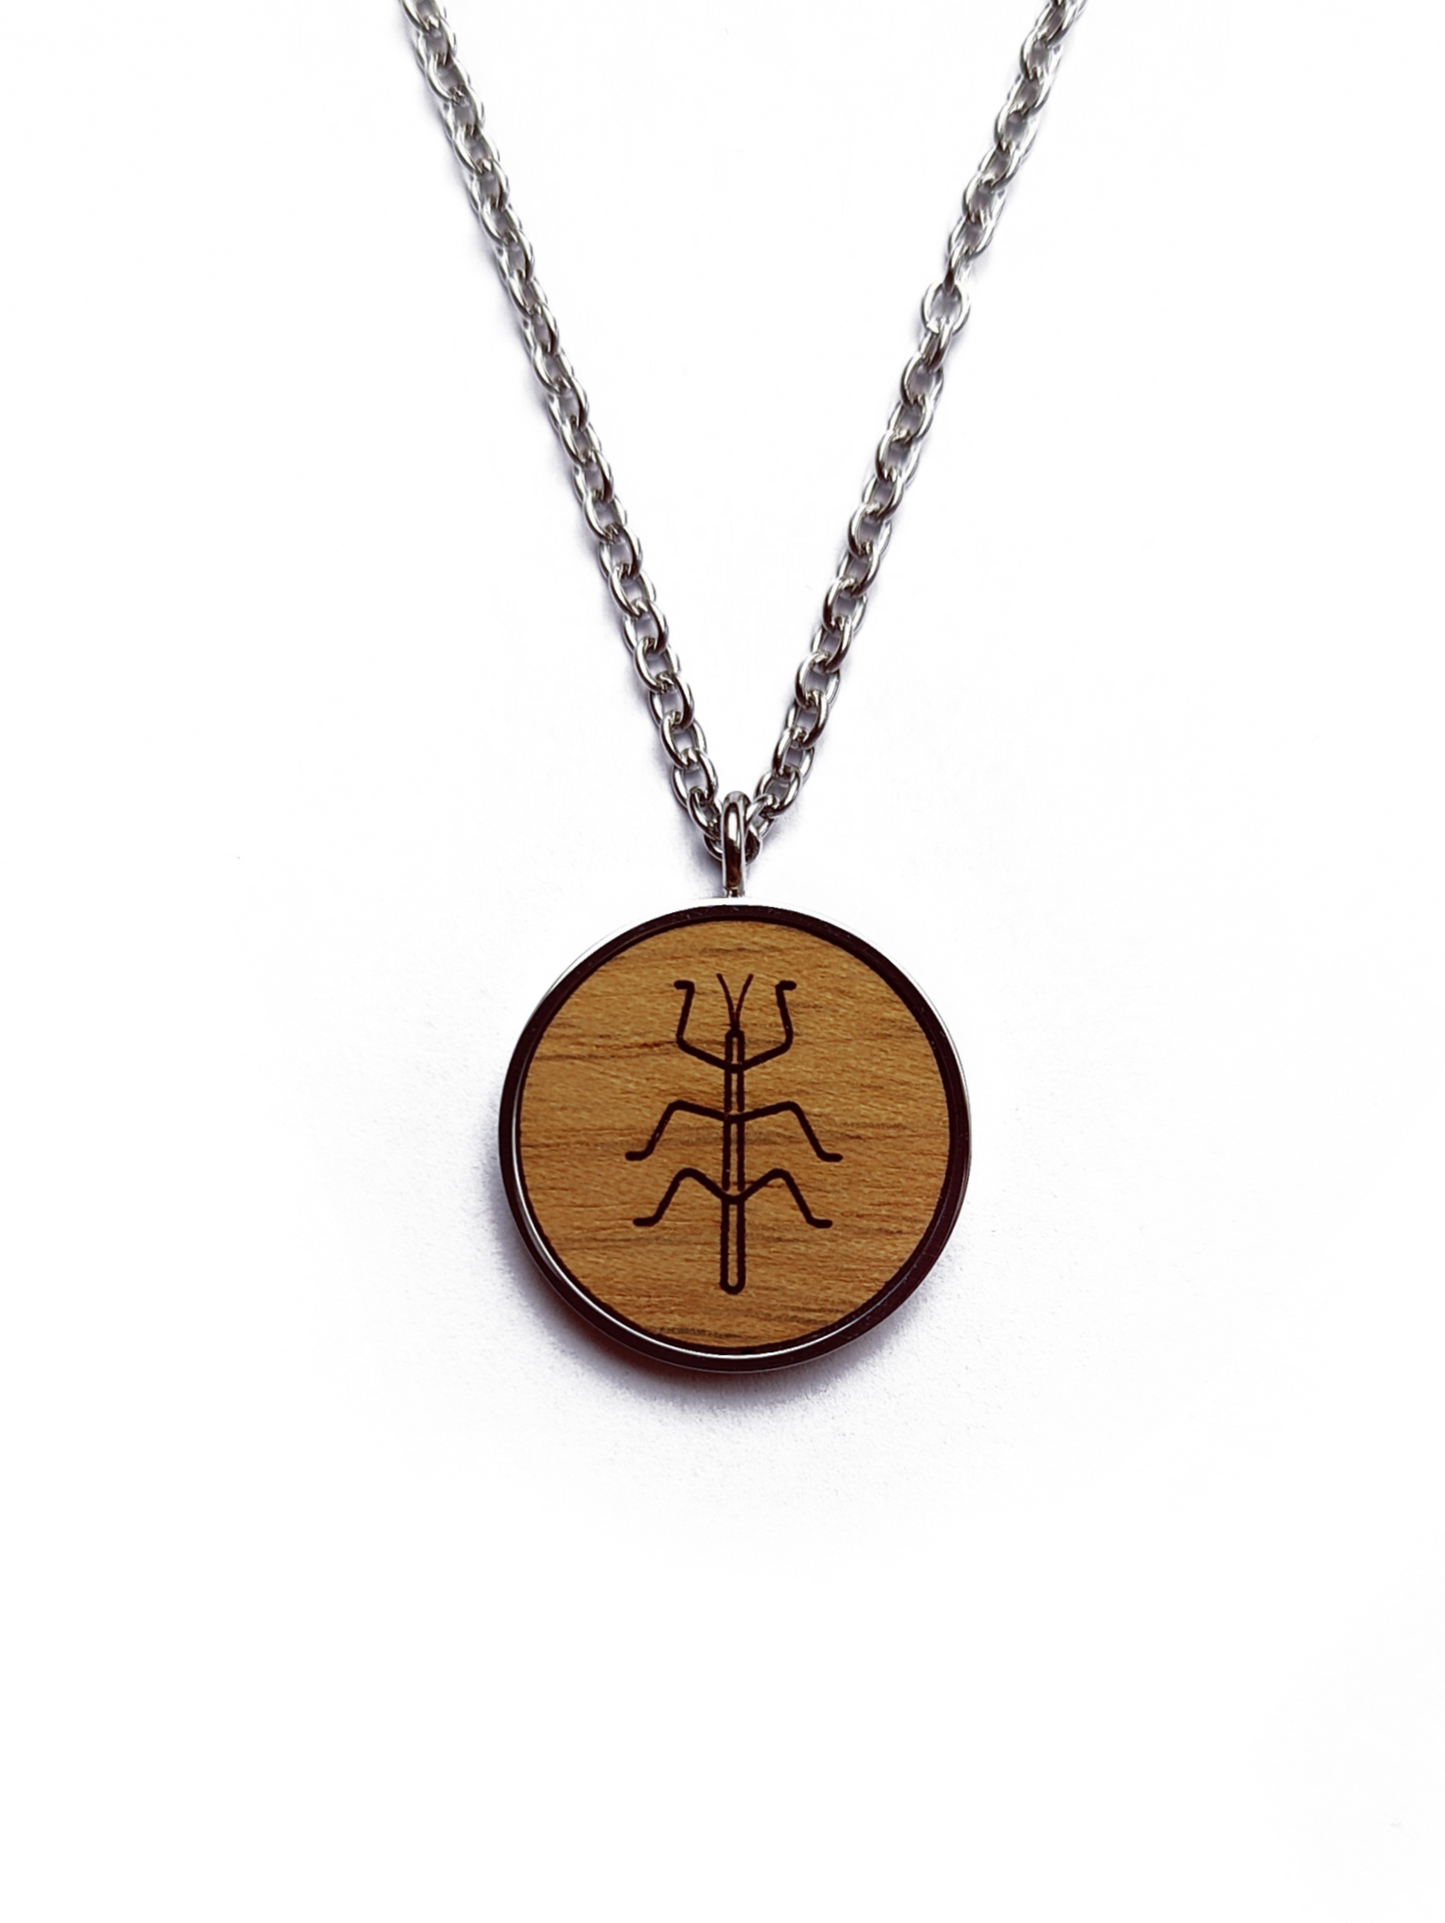 Nut wood stick insect pendant necklace with stainless steel chain. All our eco-friendly necklaces are delivered in FSC certified jewelry boxes with sustainable foam.